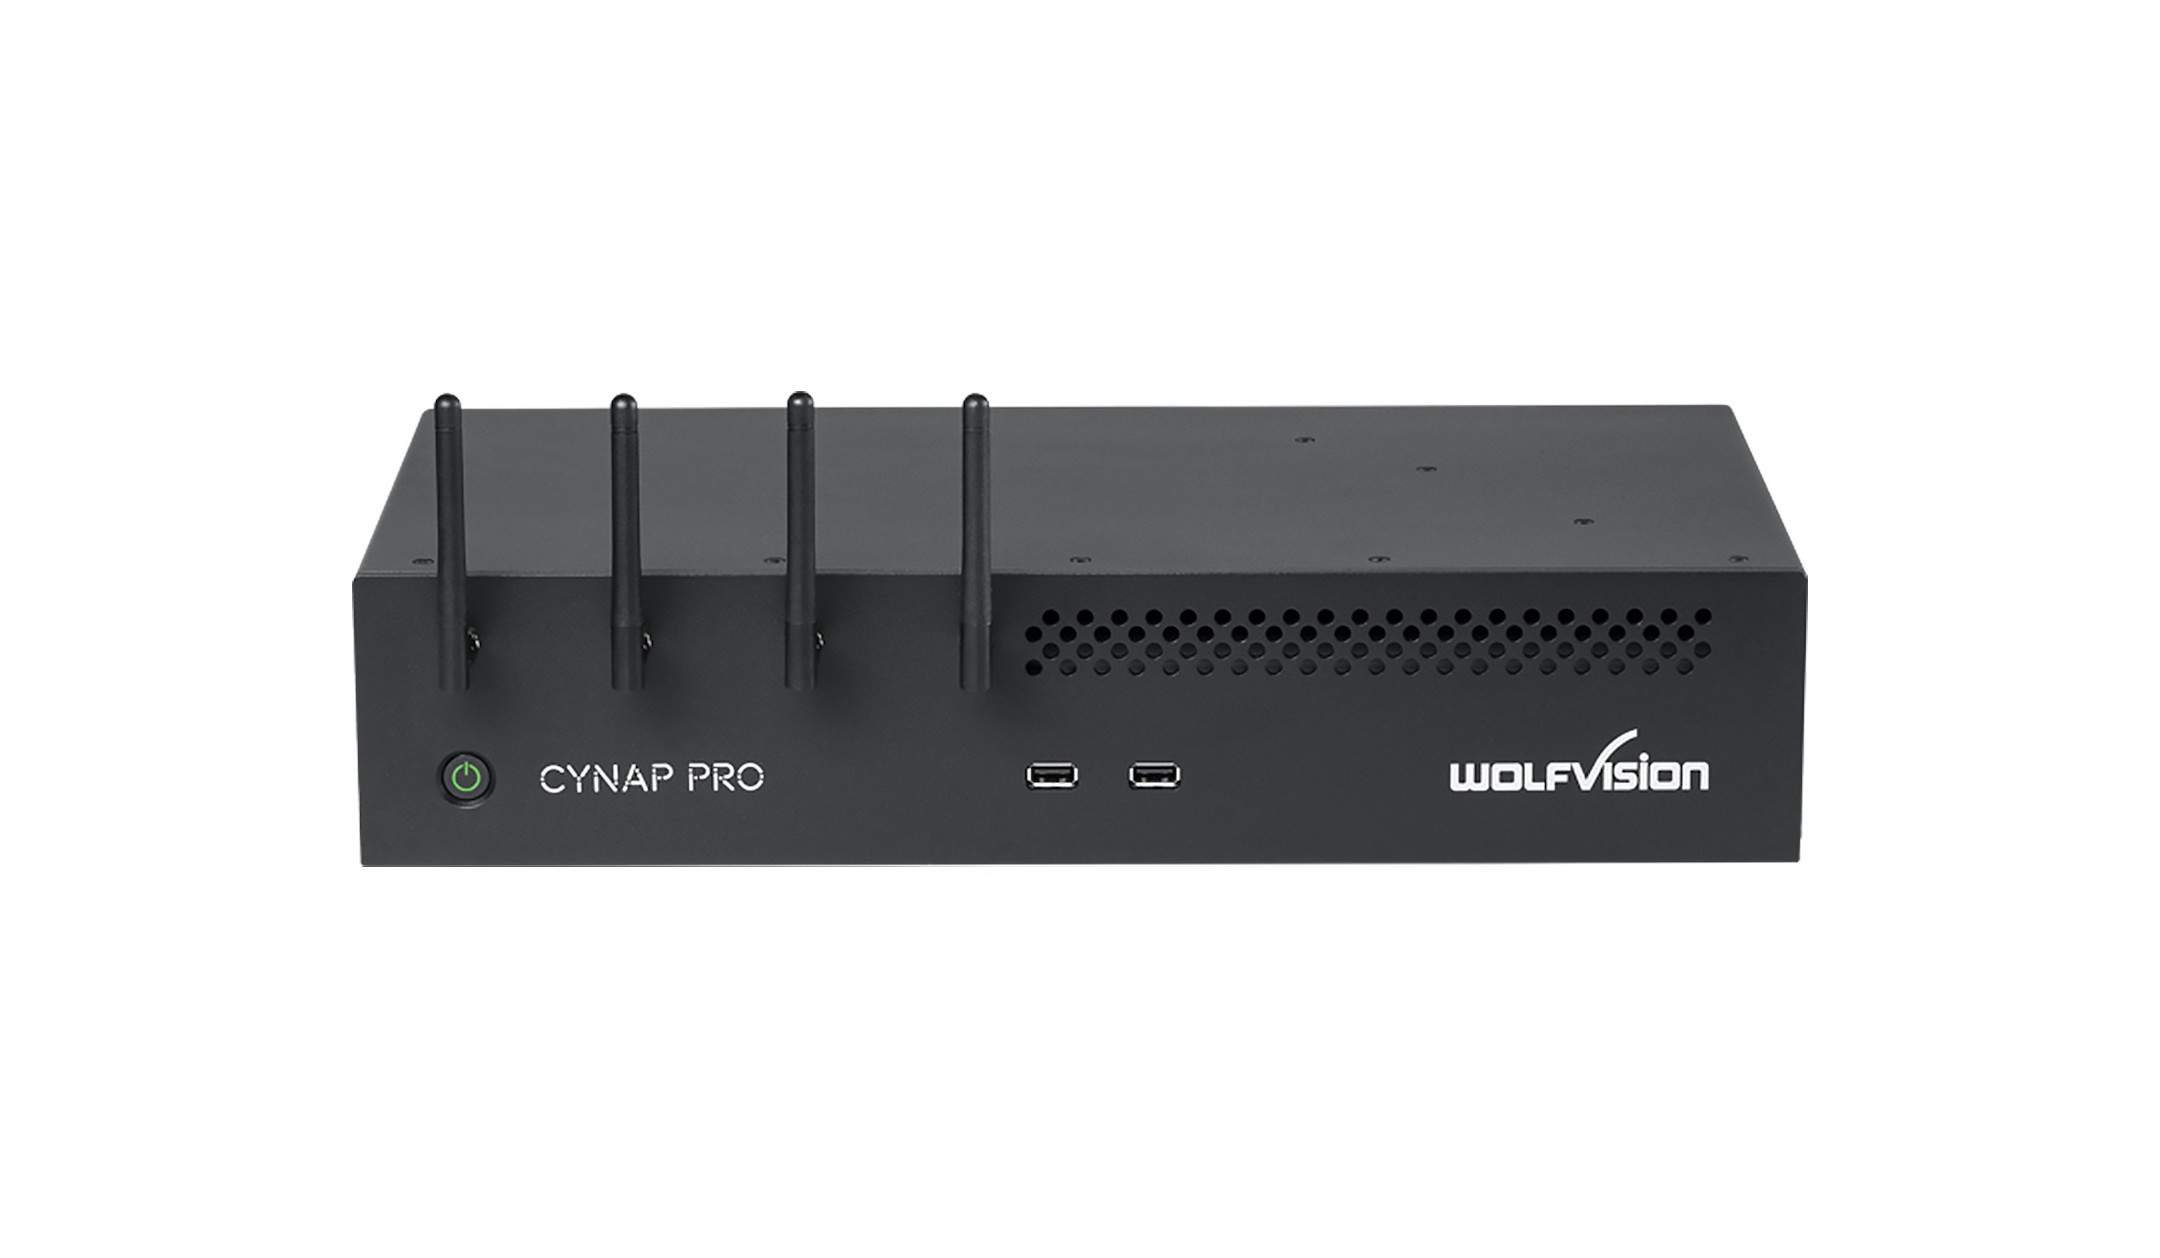 Wolfvision-Cynap-Pro-HDMI-HDBaseT-IN-OUT-Version-D-drahtloses-All-in-One-Prasentationssystem